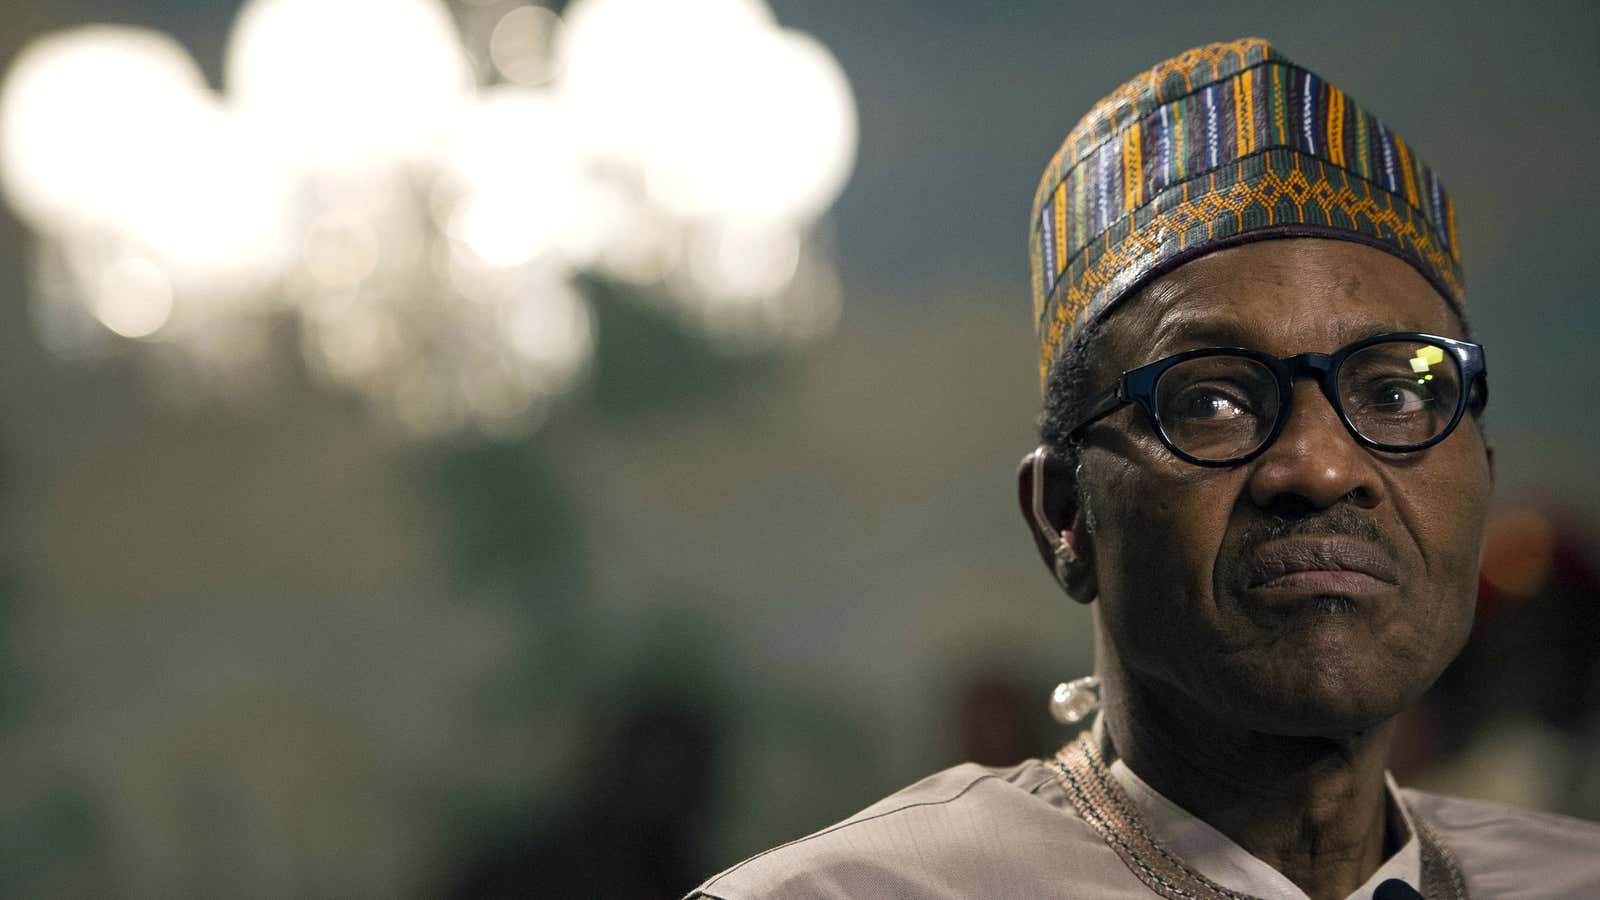 Nigeria’s president Buhari has had to look far to find cabinet ministers he can work with